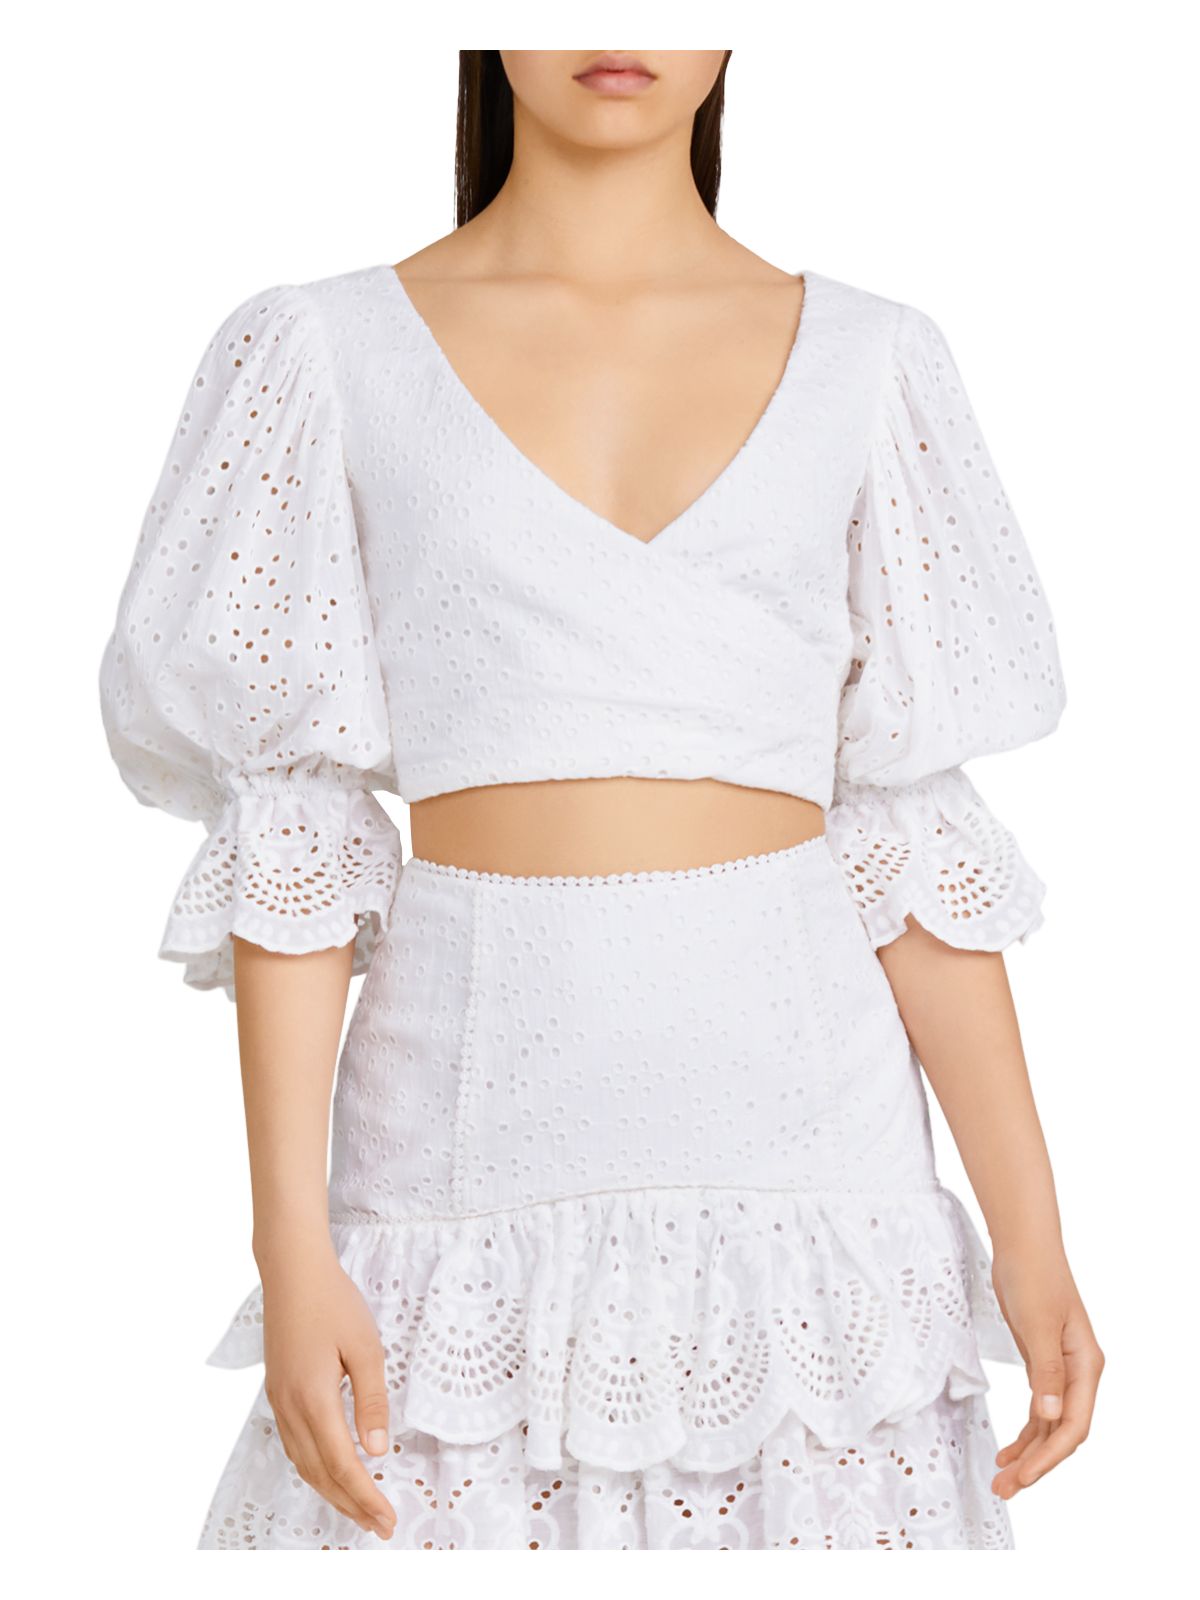 SIGNIFICANT OTHER Womens Ivory Eyelet Cut Out Smocked Pouf Sleeve Surplice Neckline Party Top 6